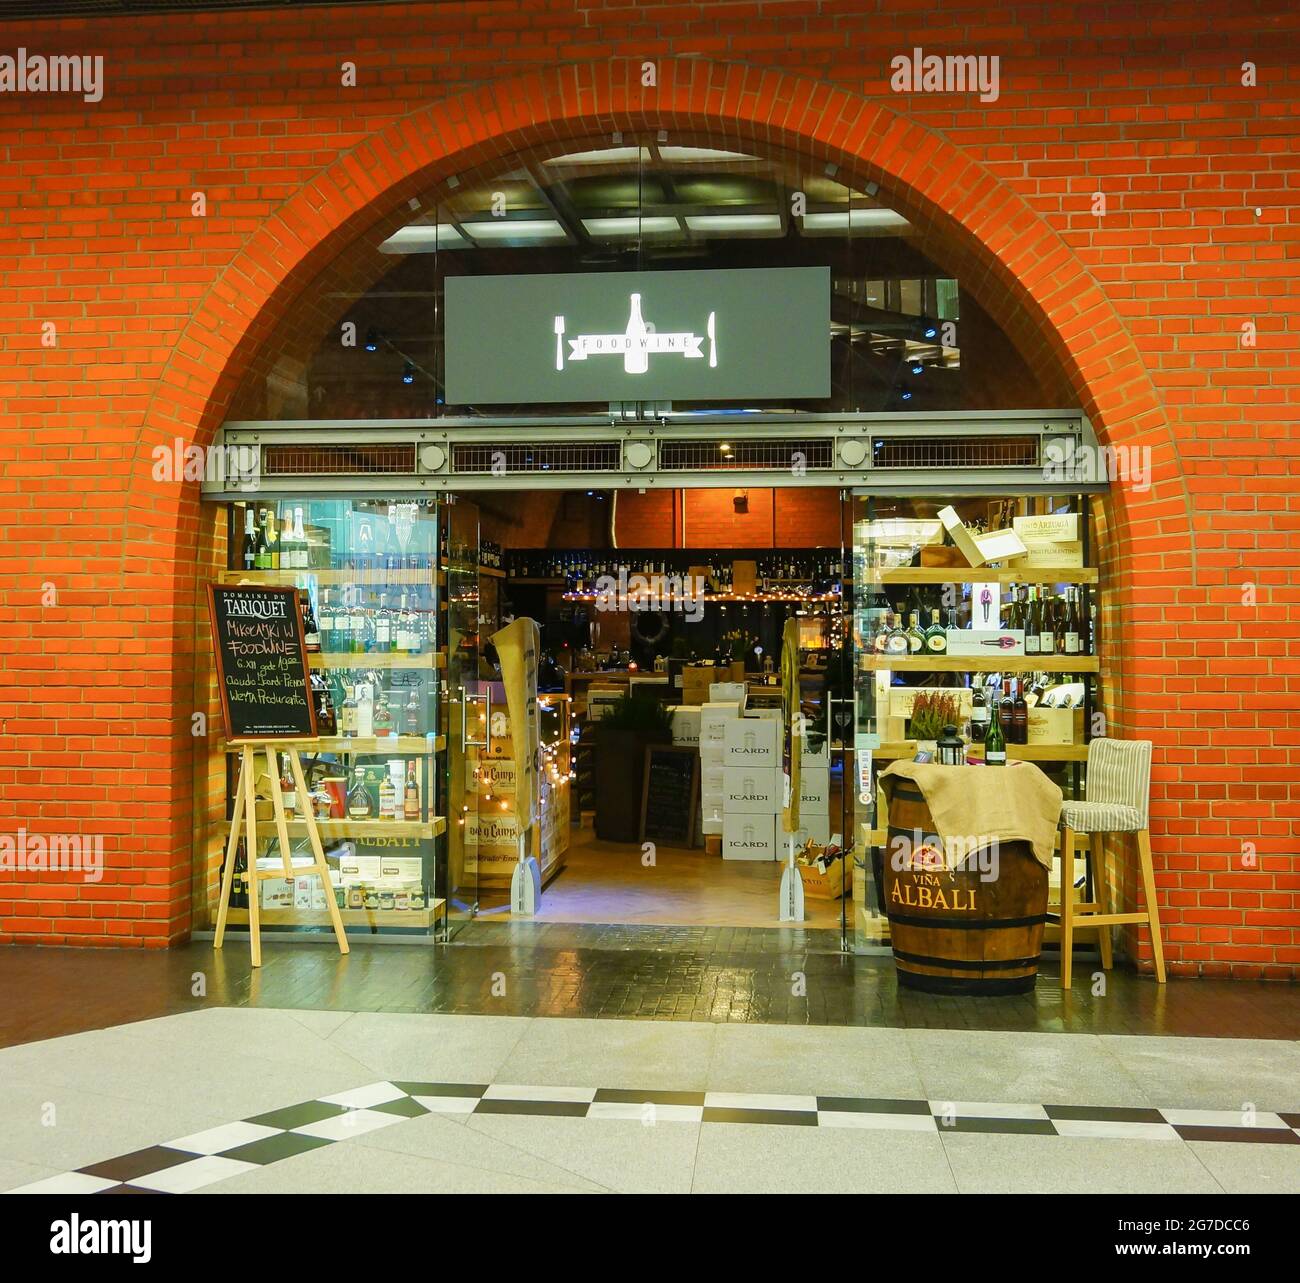 POZNAN, POLAND - Jun 12, 2013: The front entrance of a wine store in the Stary Browar shopping mall Stock Photo